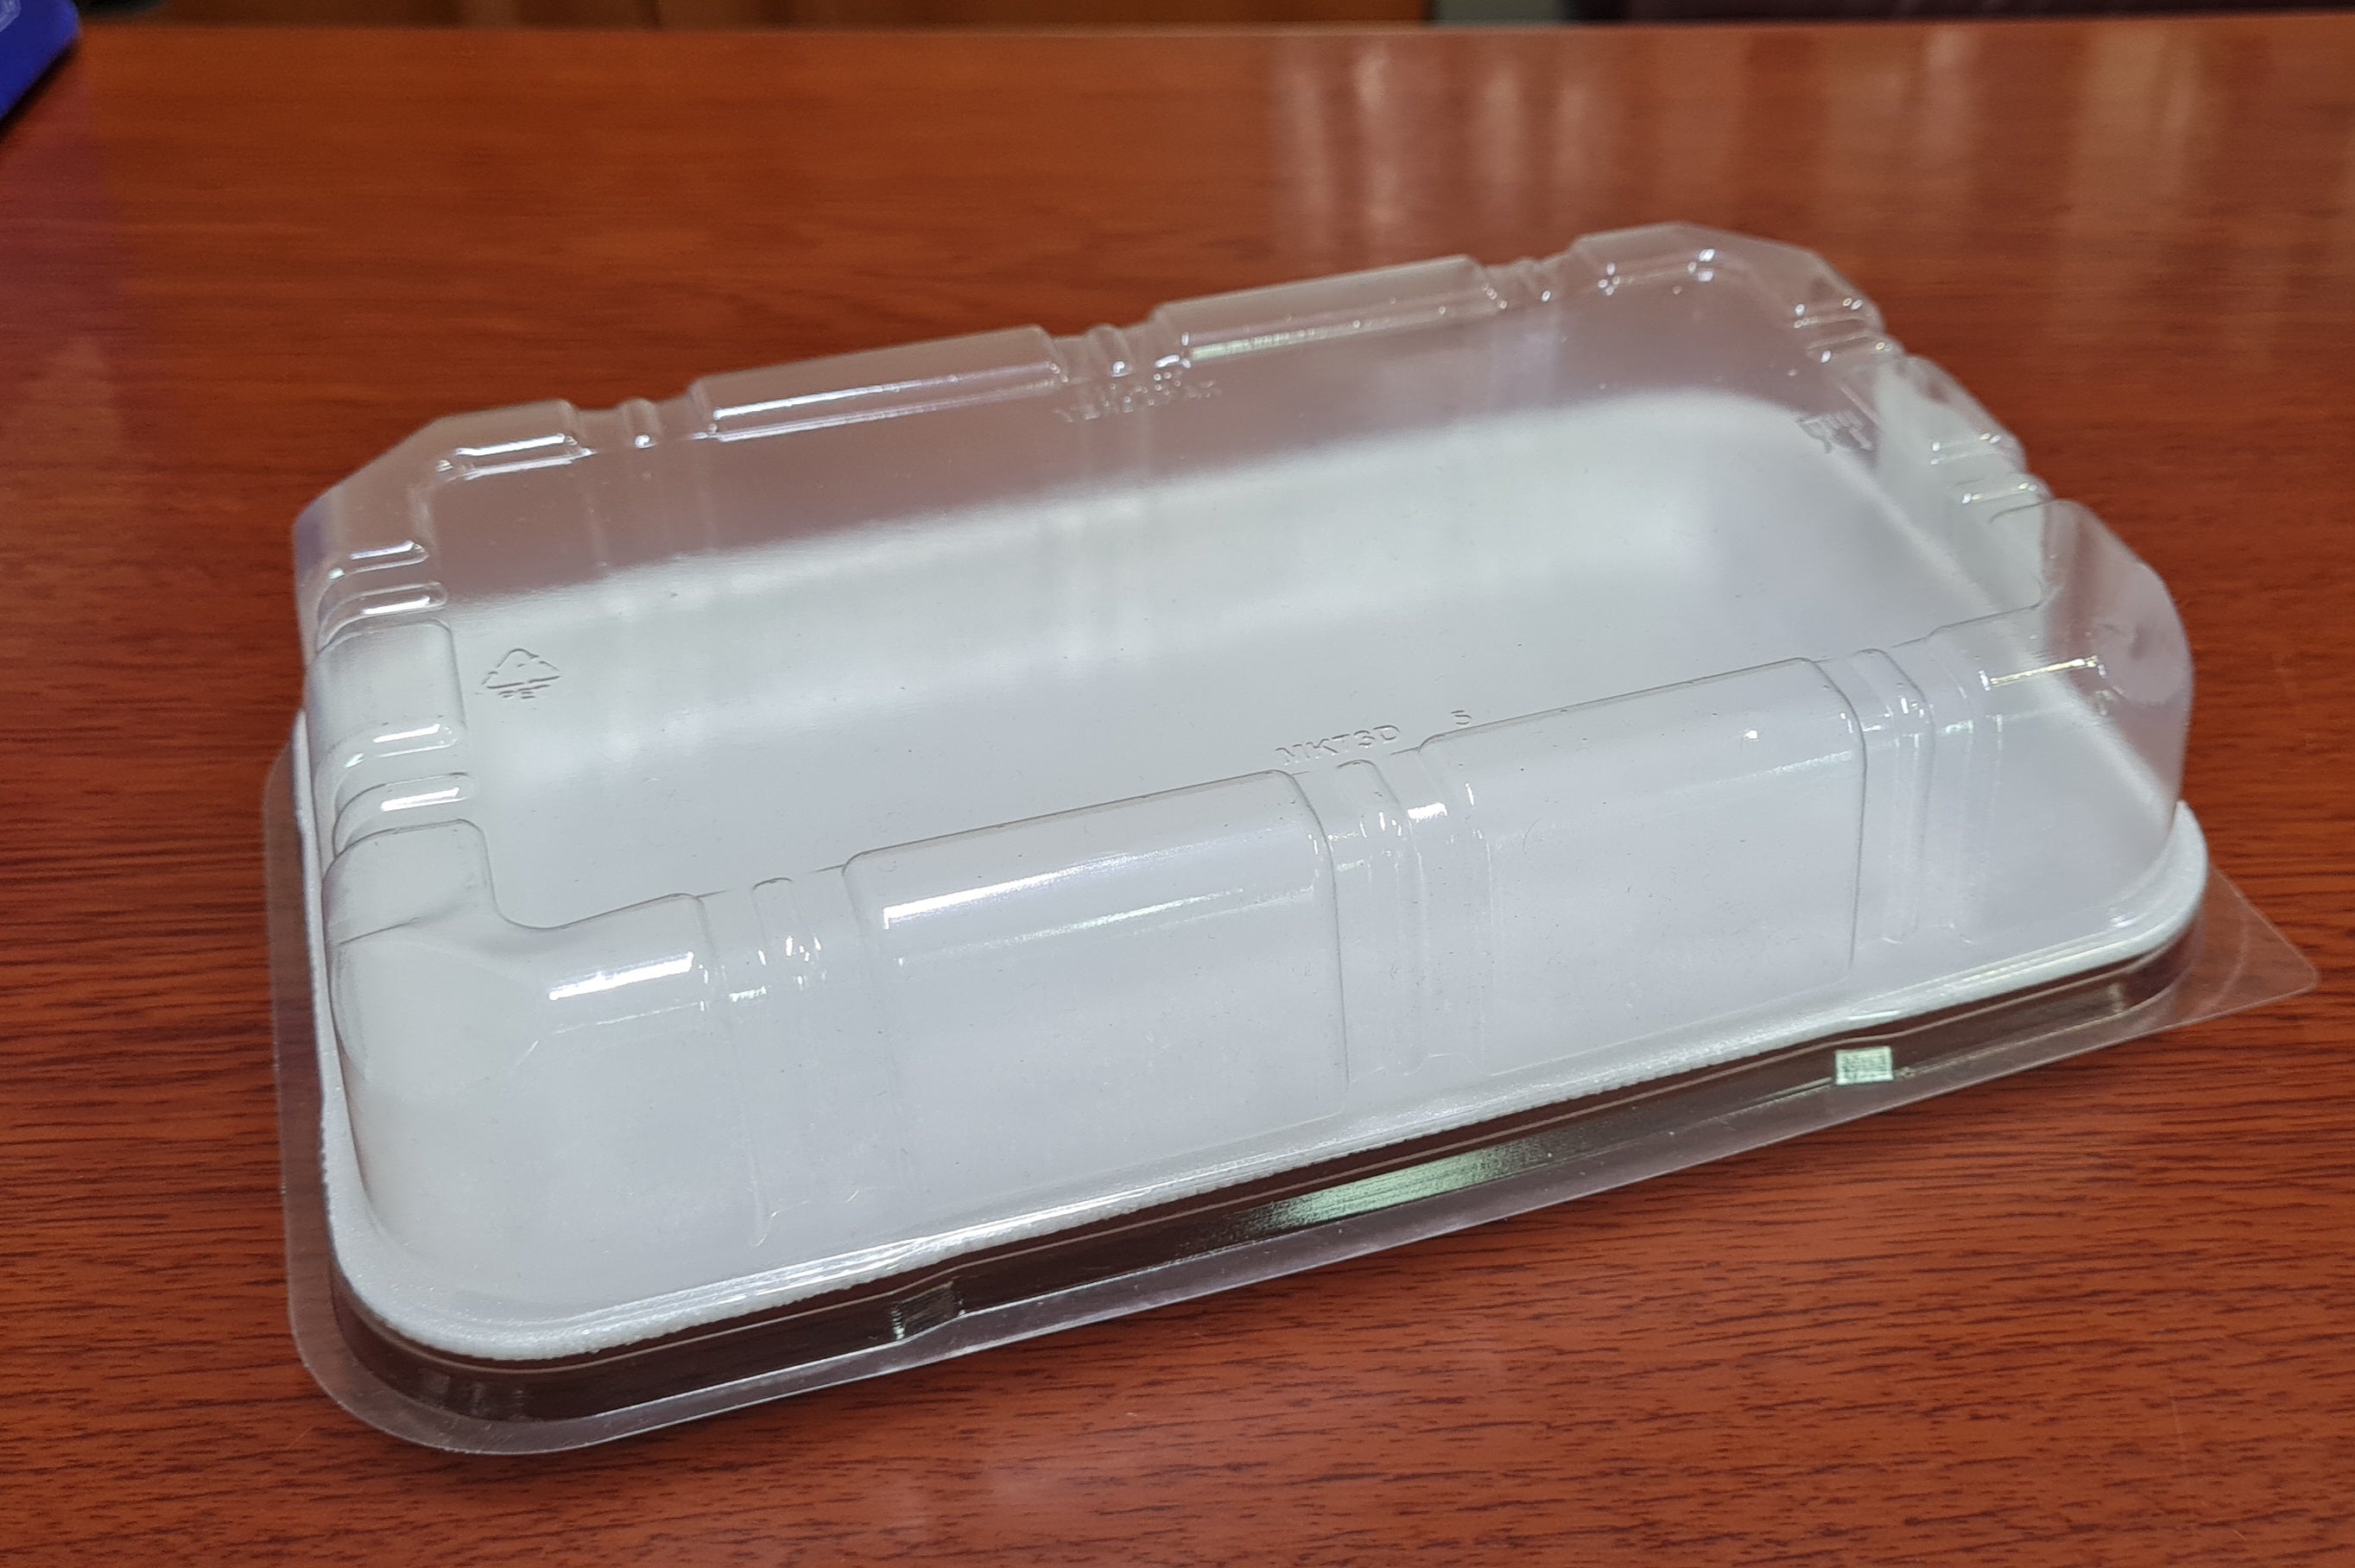 Zibo Disposable Cake Dome L344 - Fits Fomo Tray K73D  - Dome only